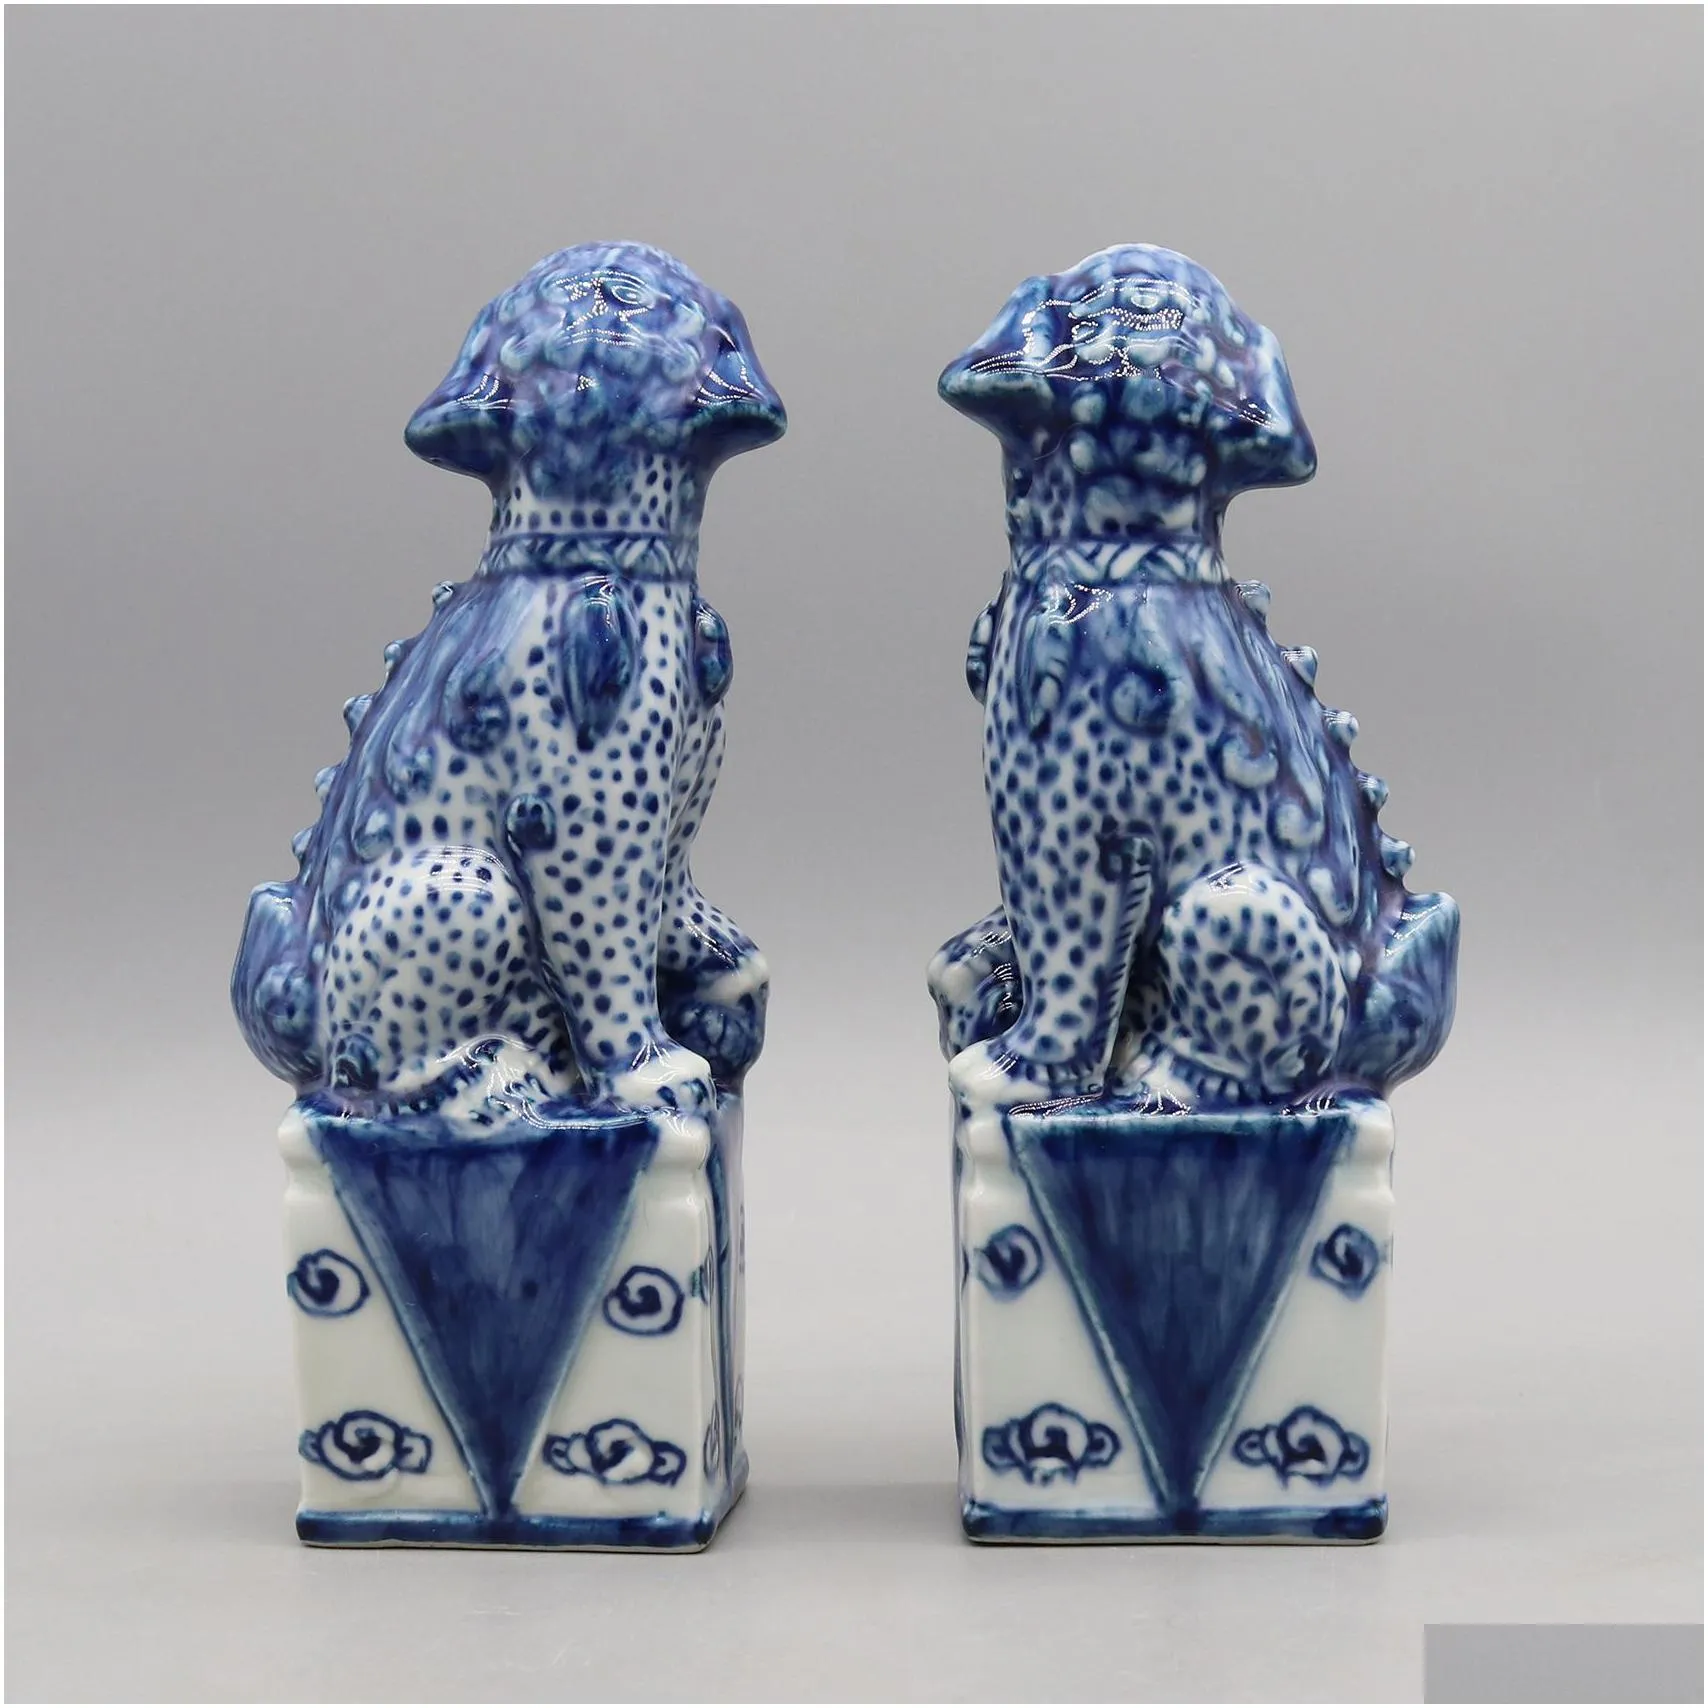 Blue and White Ceramic Foo Dogs, Fu Dogs, Buddha Dogs, Collectible Guardian lions, Ceramic Sculpture, Home decoration